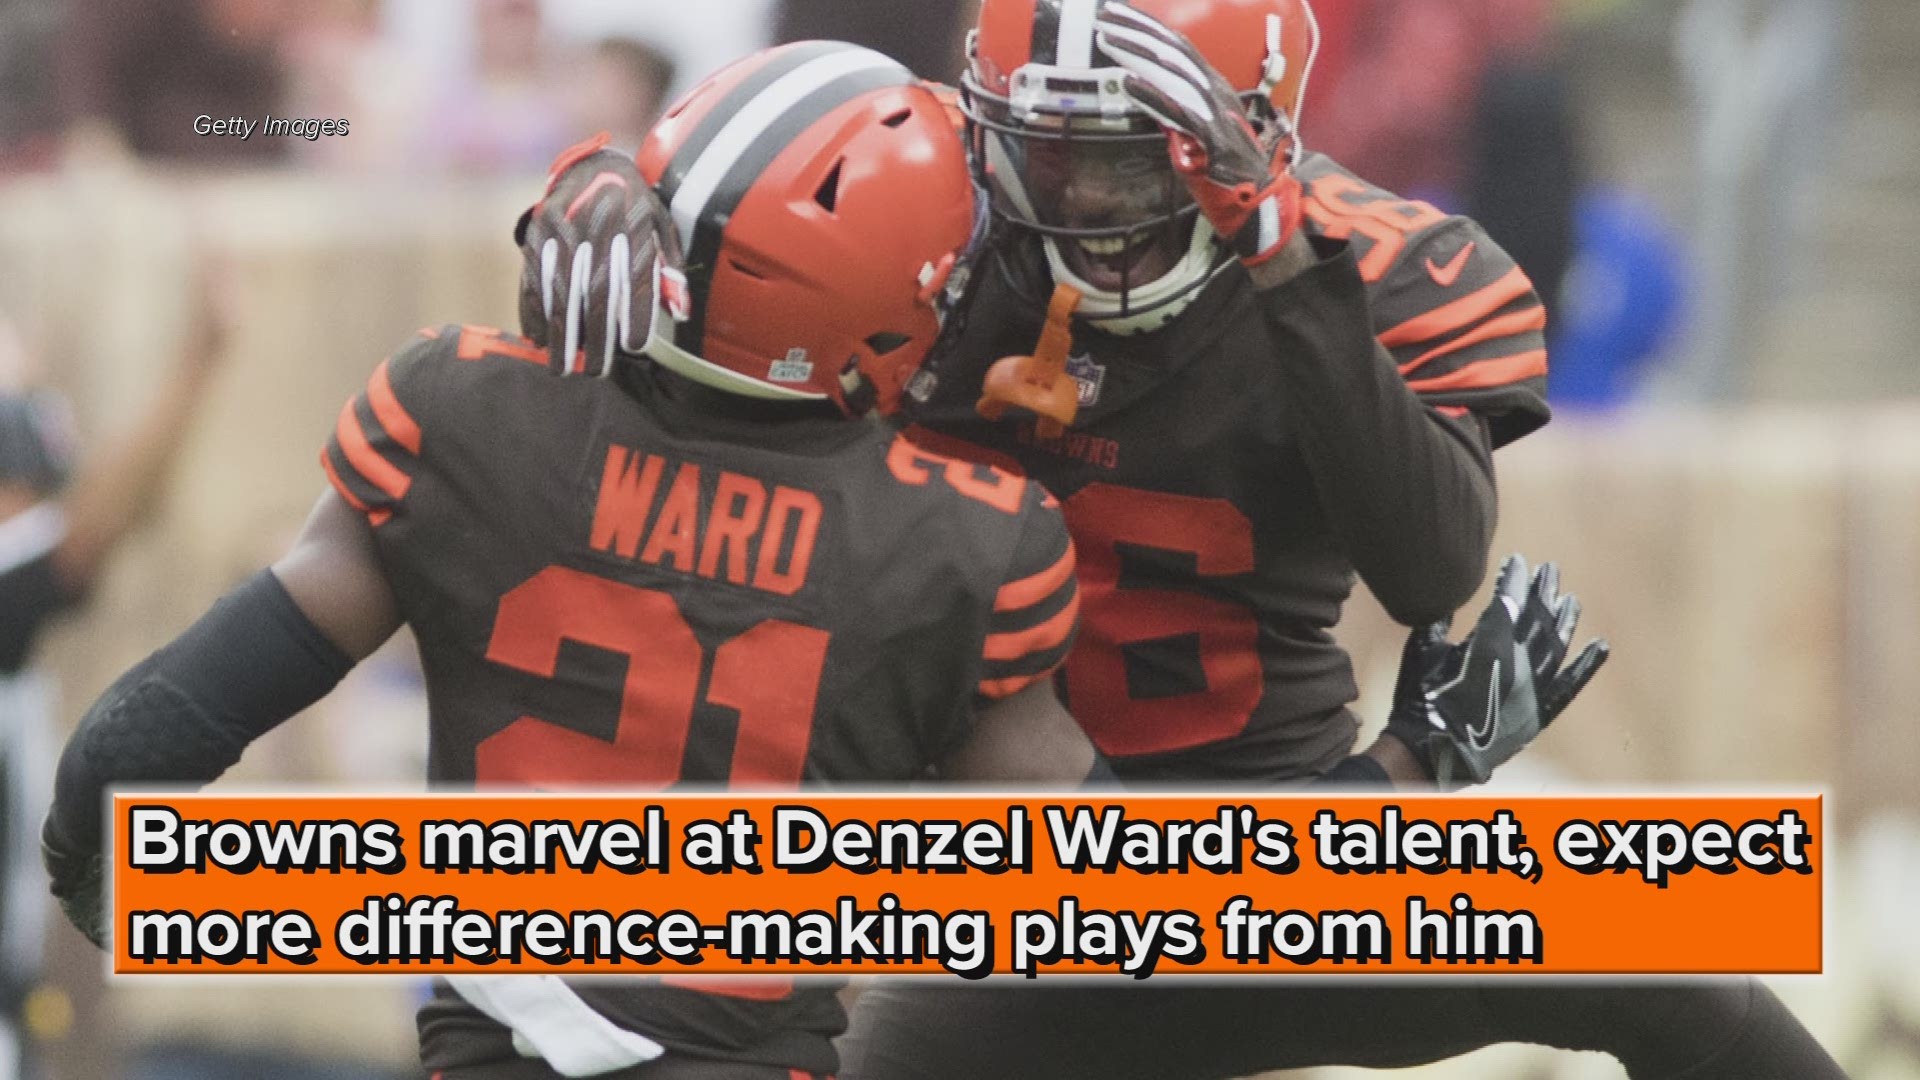 Cleveland Browns marvel at Denzel Ward's talent, expect more difference-making plays from him